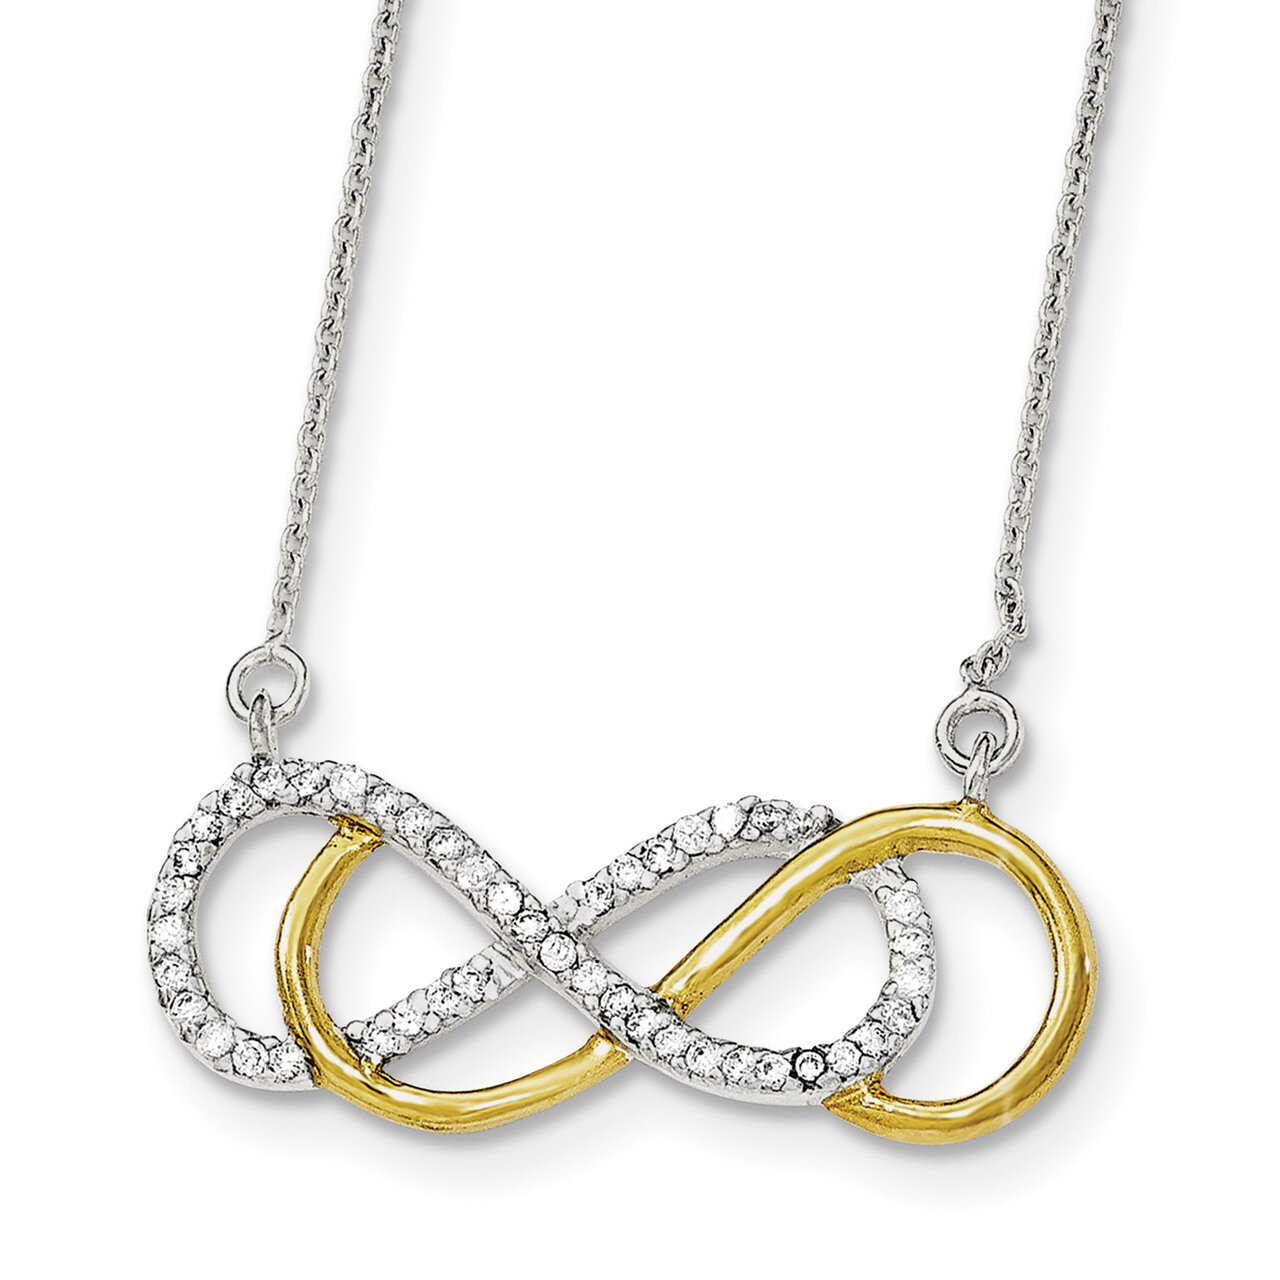 Flash Gold-plated CZ Diamond Infinity Necklace 17.5 Inch Sterling Silver QG3736-17.5